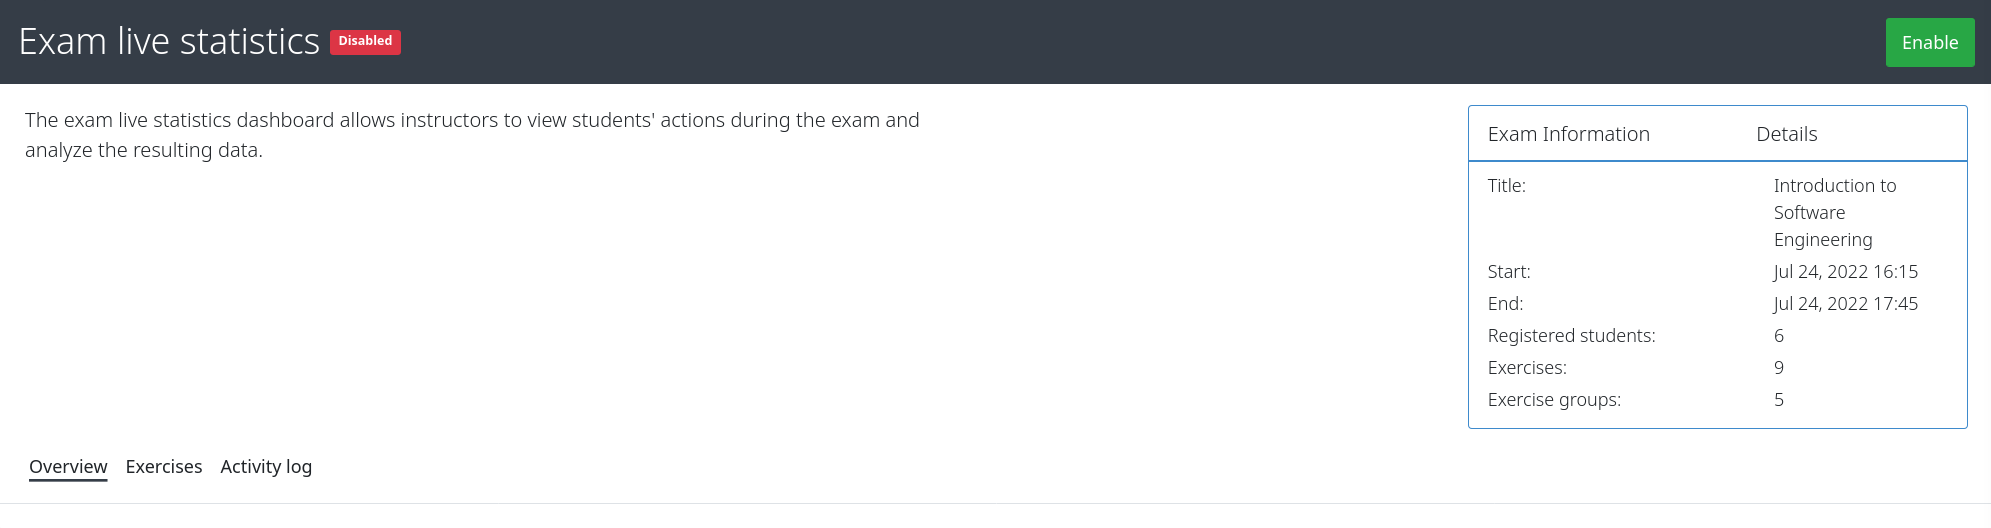 The header of the exam live statistics dashboard